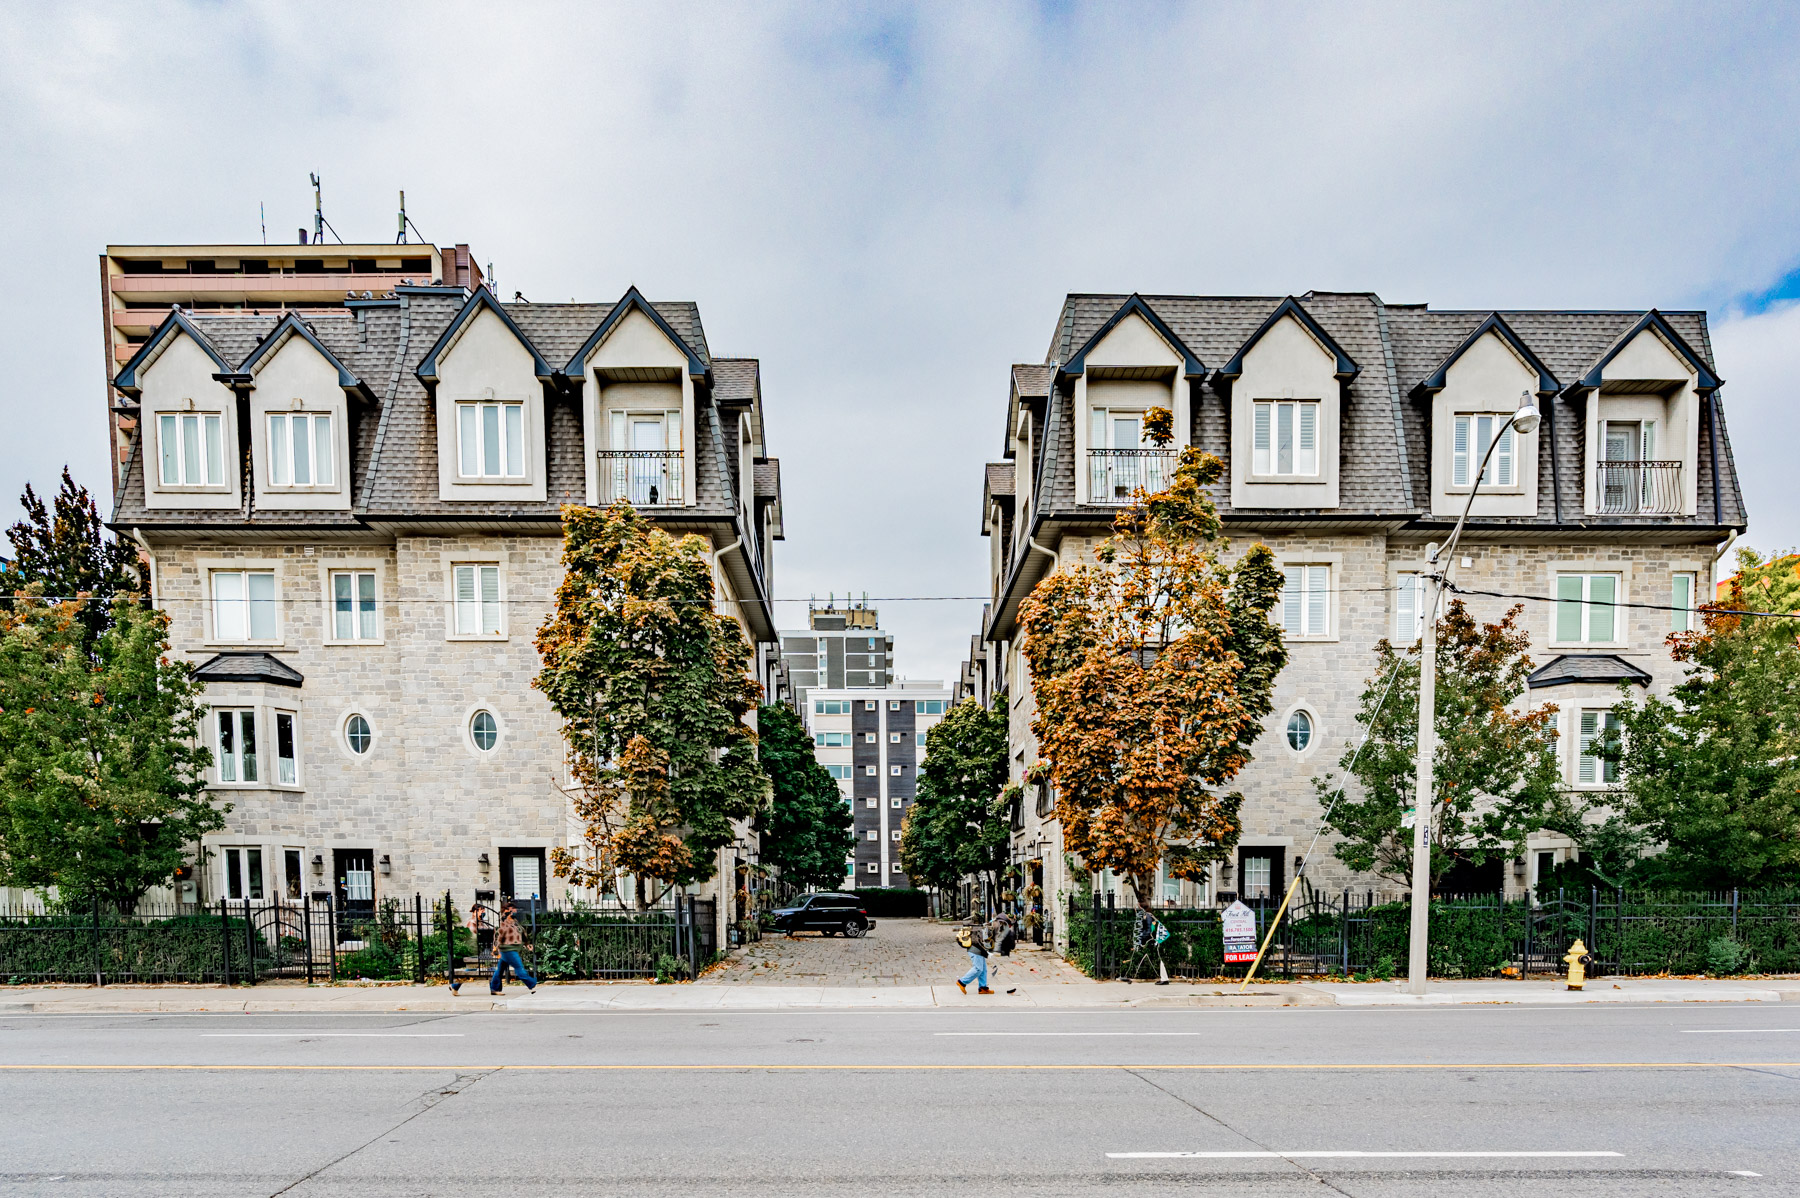 People and townhouses in Toronto's Annex neighbourhood.